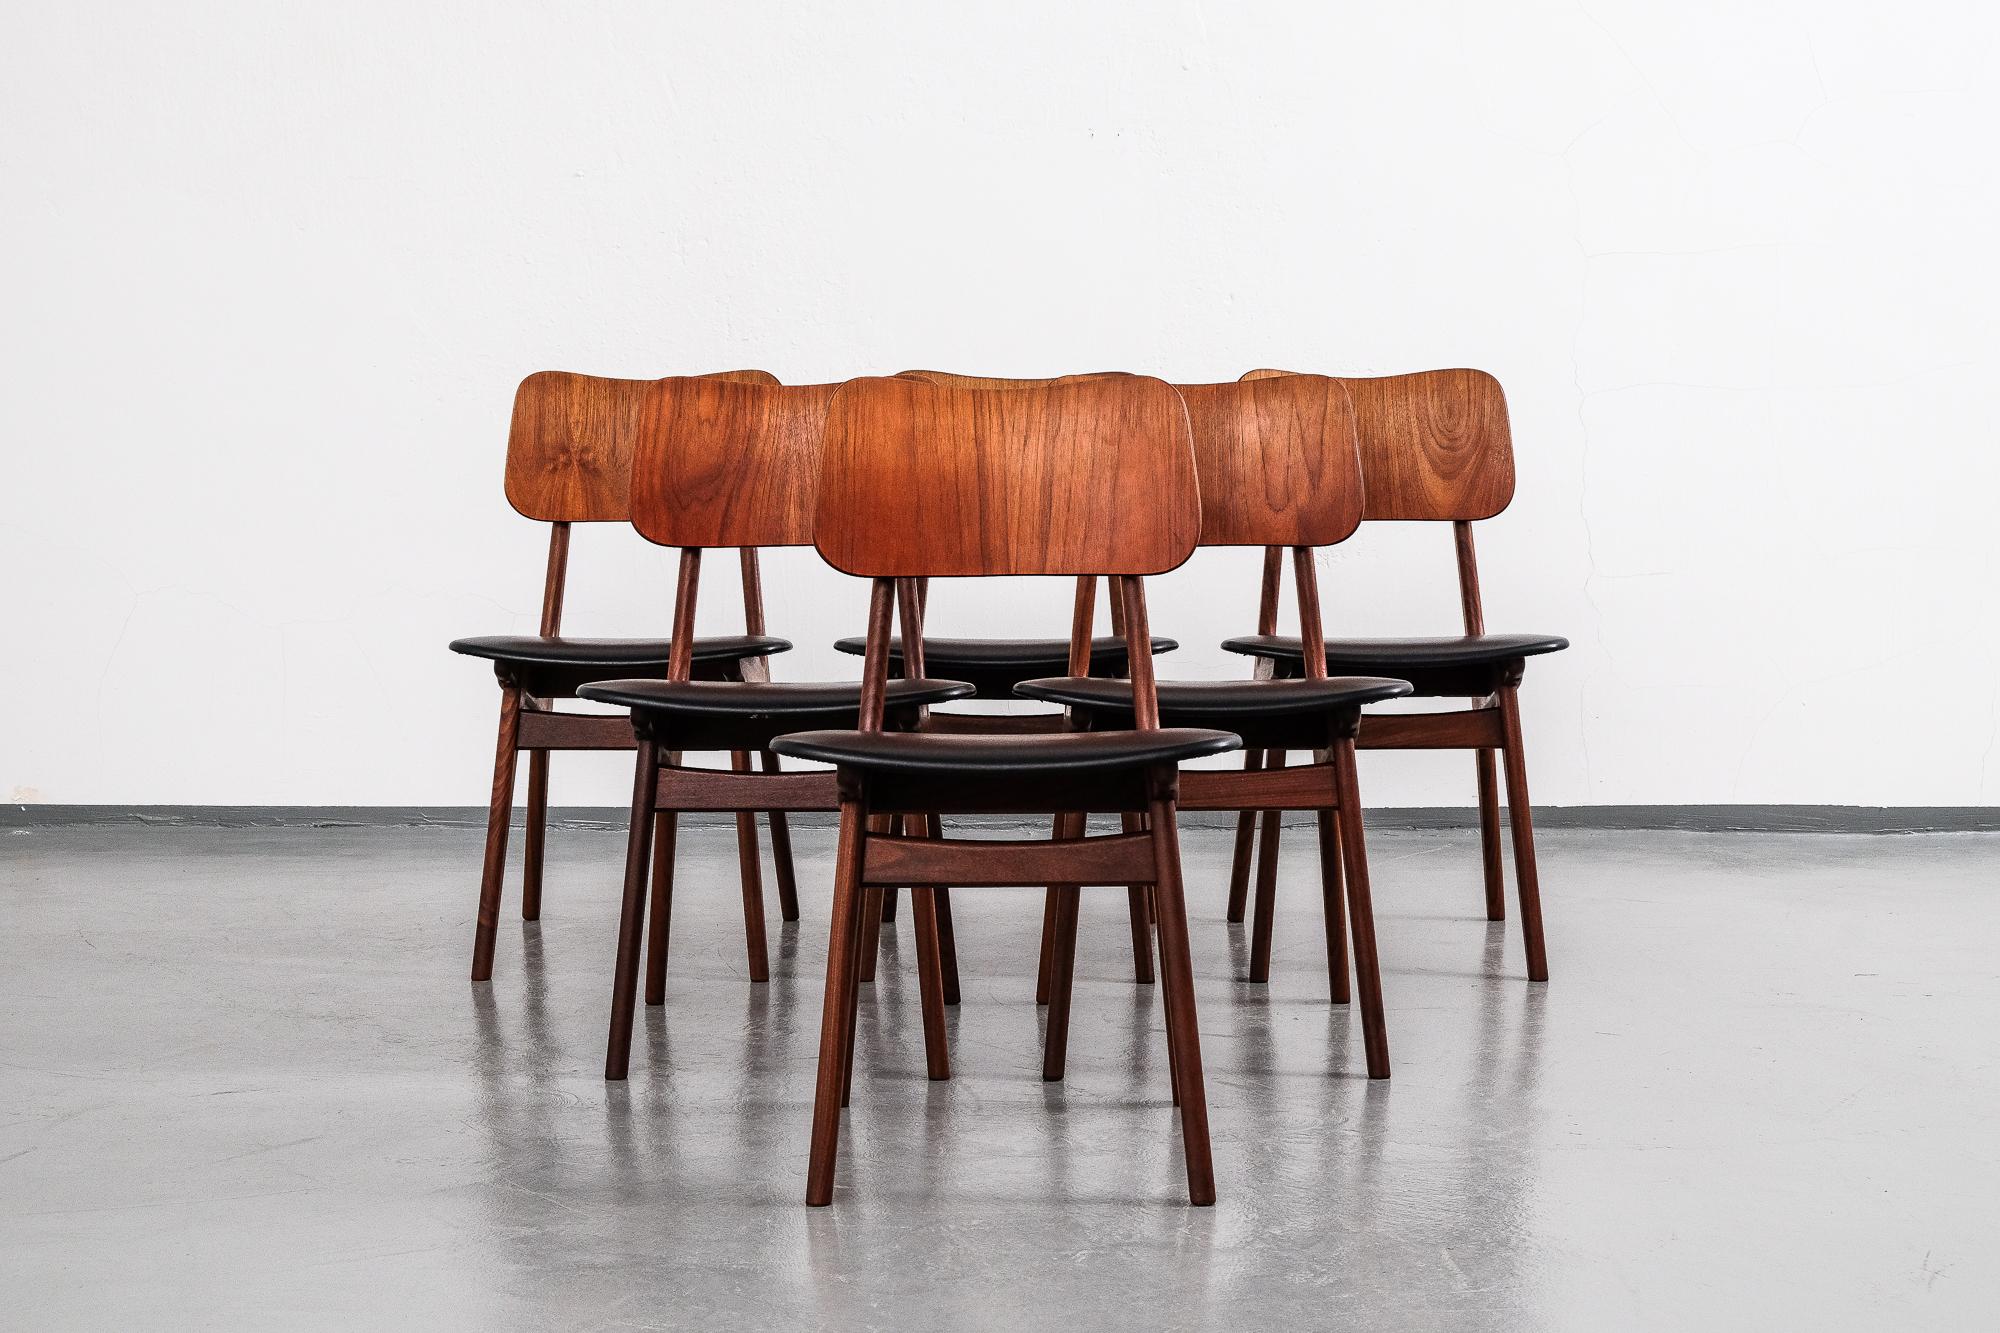 Set of six 1960s dining chairs, made by Boltinge Stolefabrik in Denmark. Solid teak frame with a bentwood teak backrest and a shaped teak handle on the back with beautiful brass details. Seats upholstered in black leatherette.